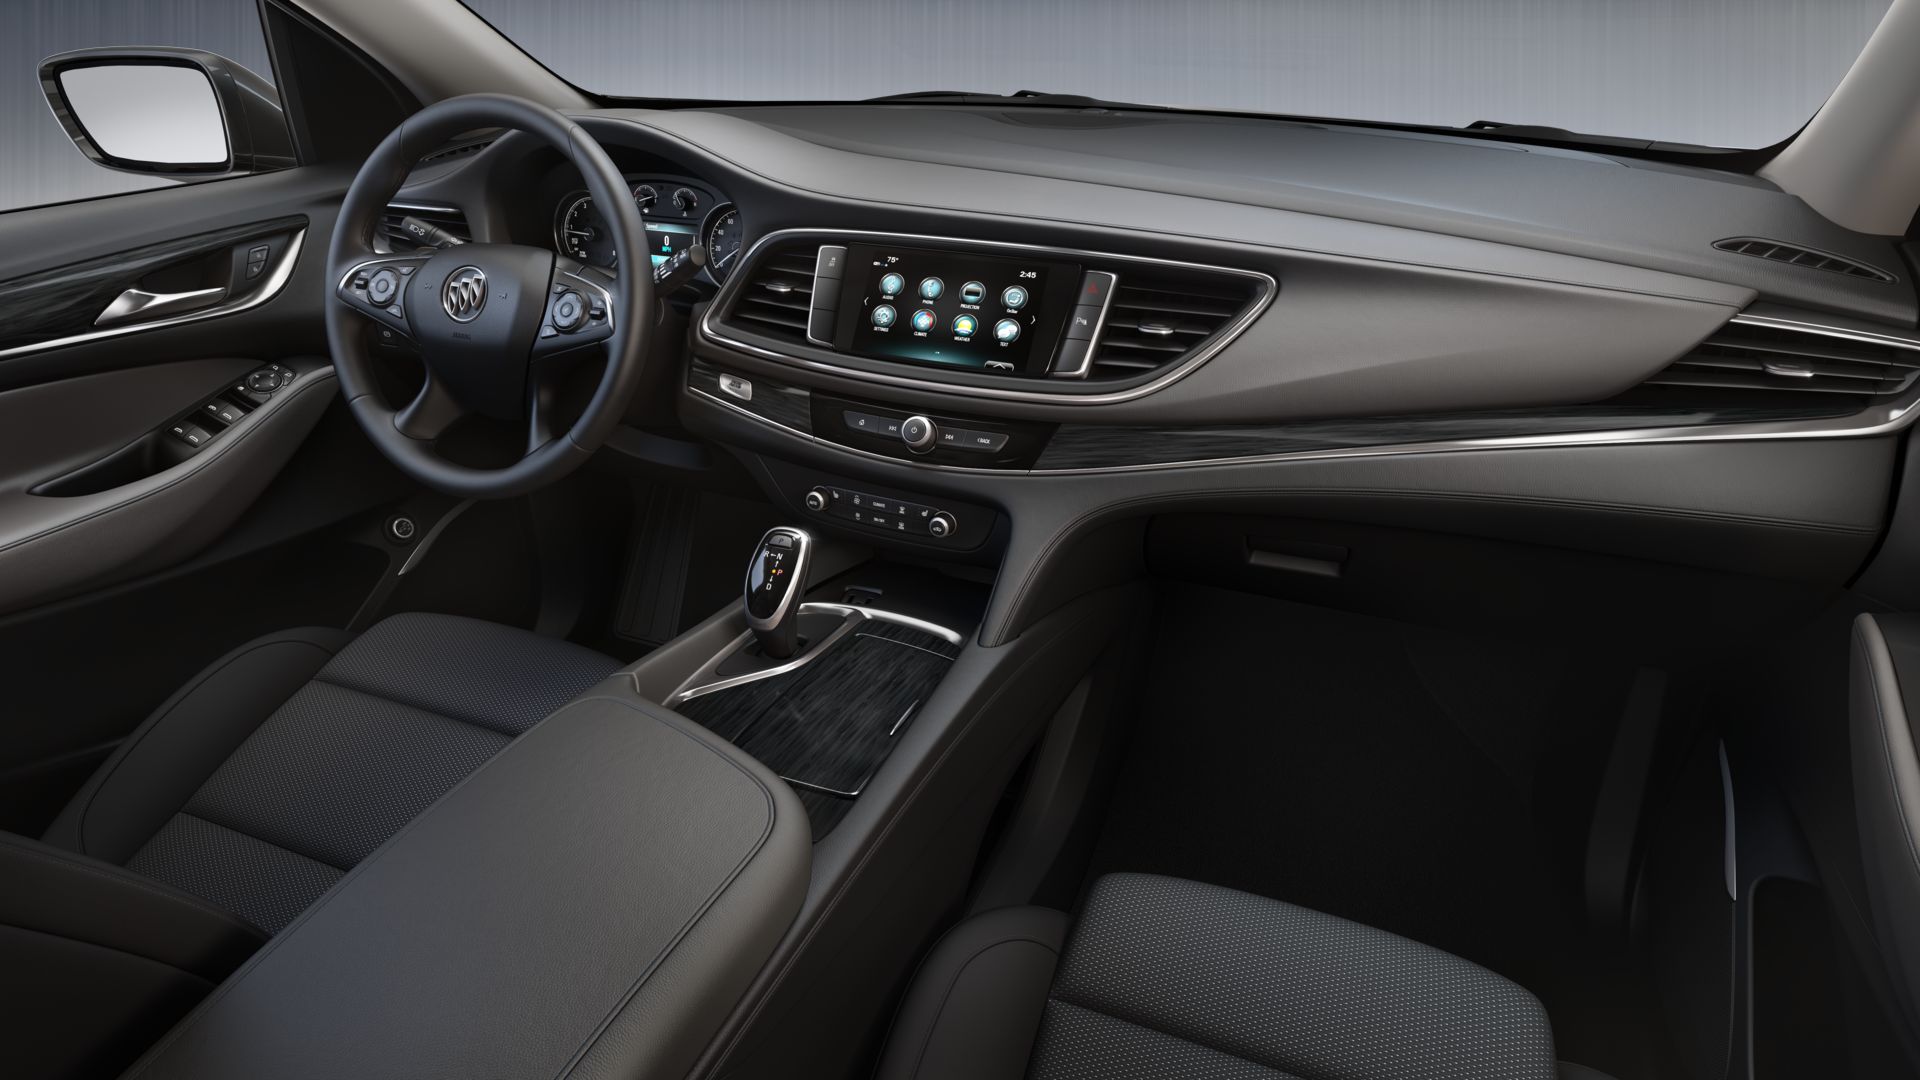 2019 Buick Enclave Interior Colors | GM Authority